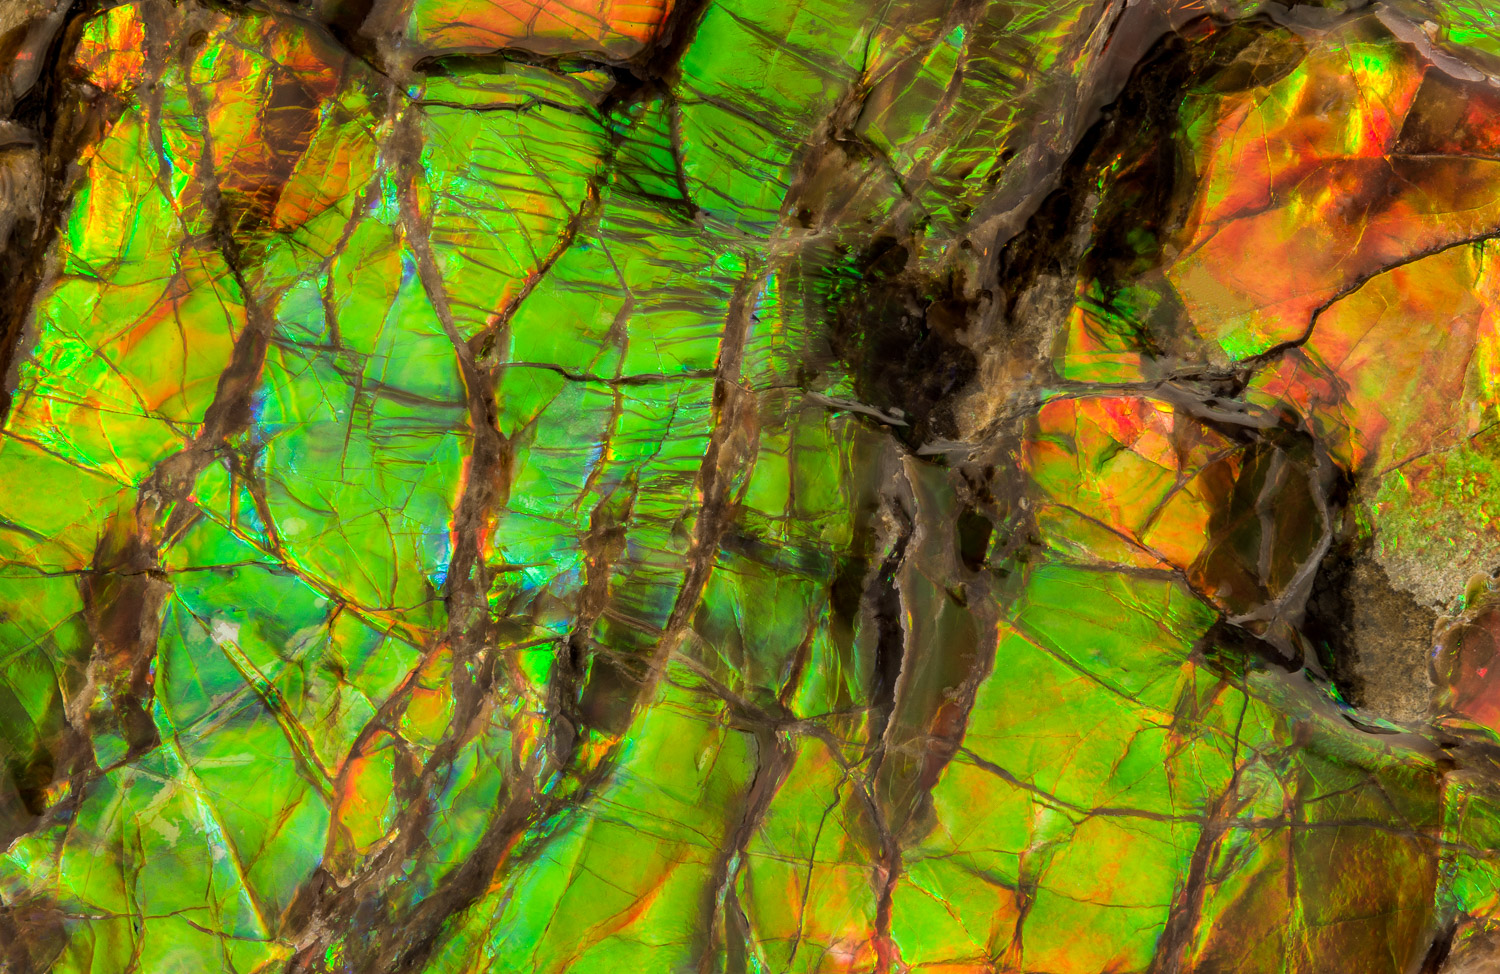 Macrophotograph showing the iridescent colors of ammolite (Placenticeras sp.).  Ammolite is composed of the fossilized shells...